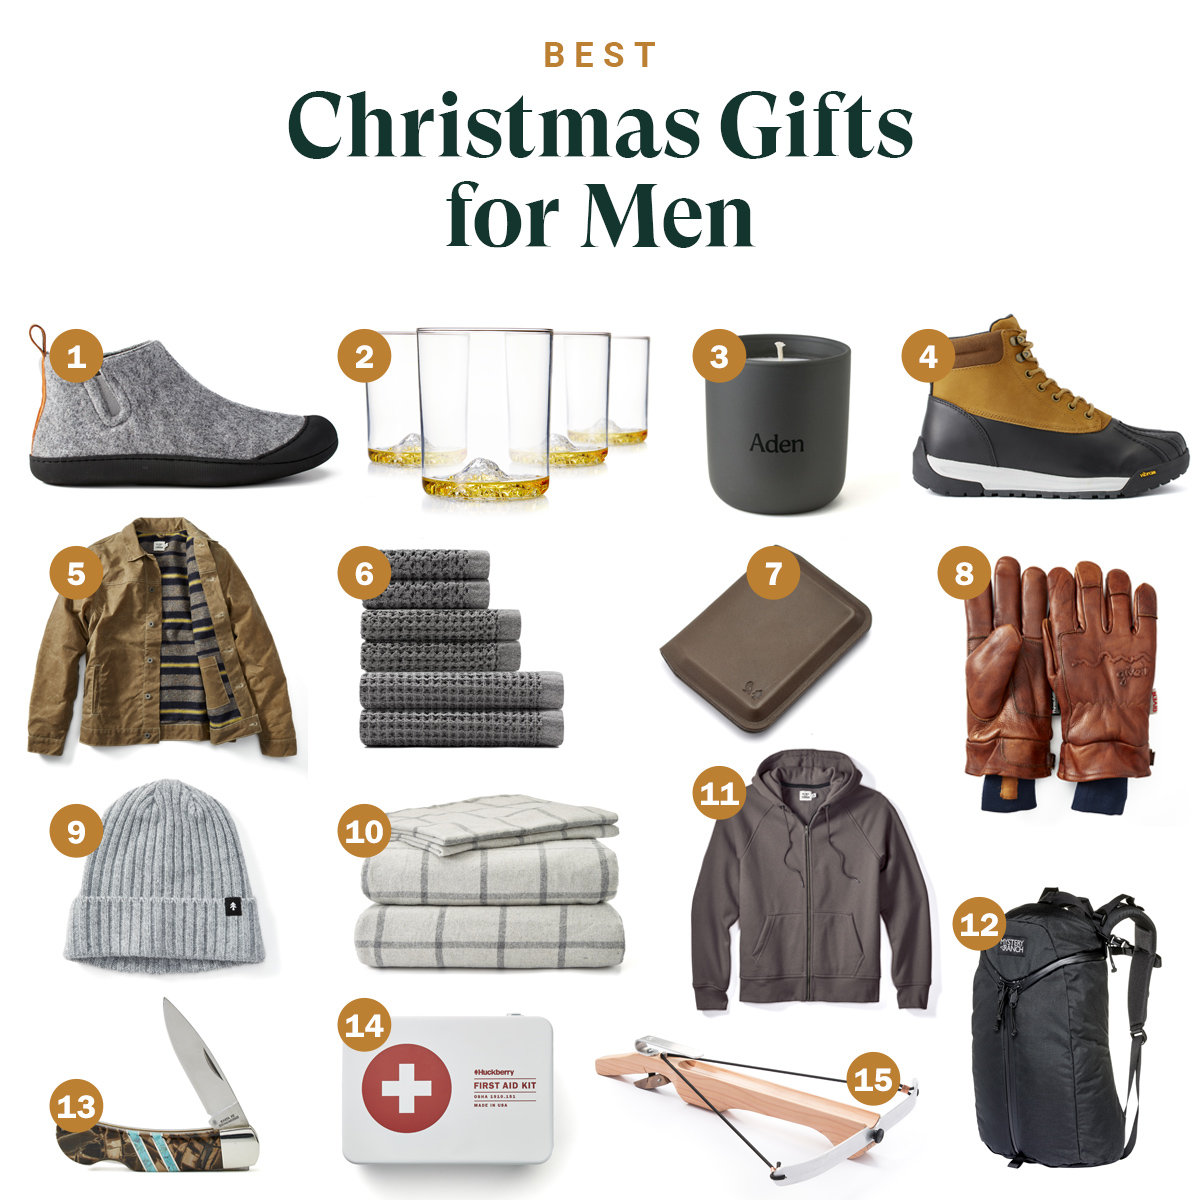 Top Men's Gift Ideas for Christmas, including items from Huckberry. Don't miss out on our exclusive Giveaway!